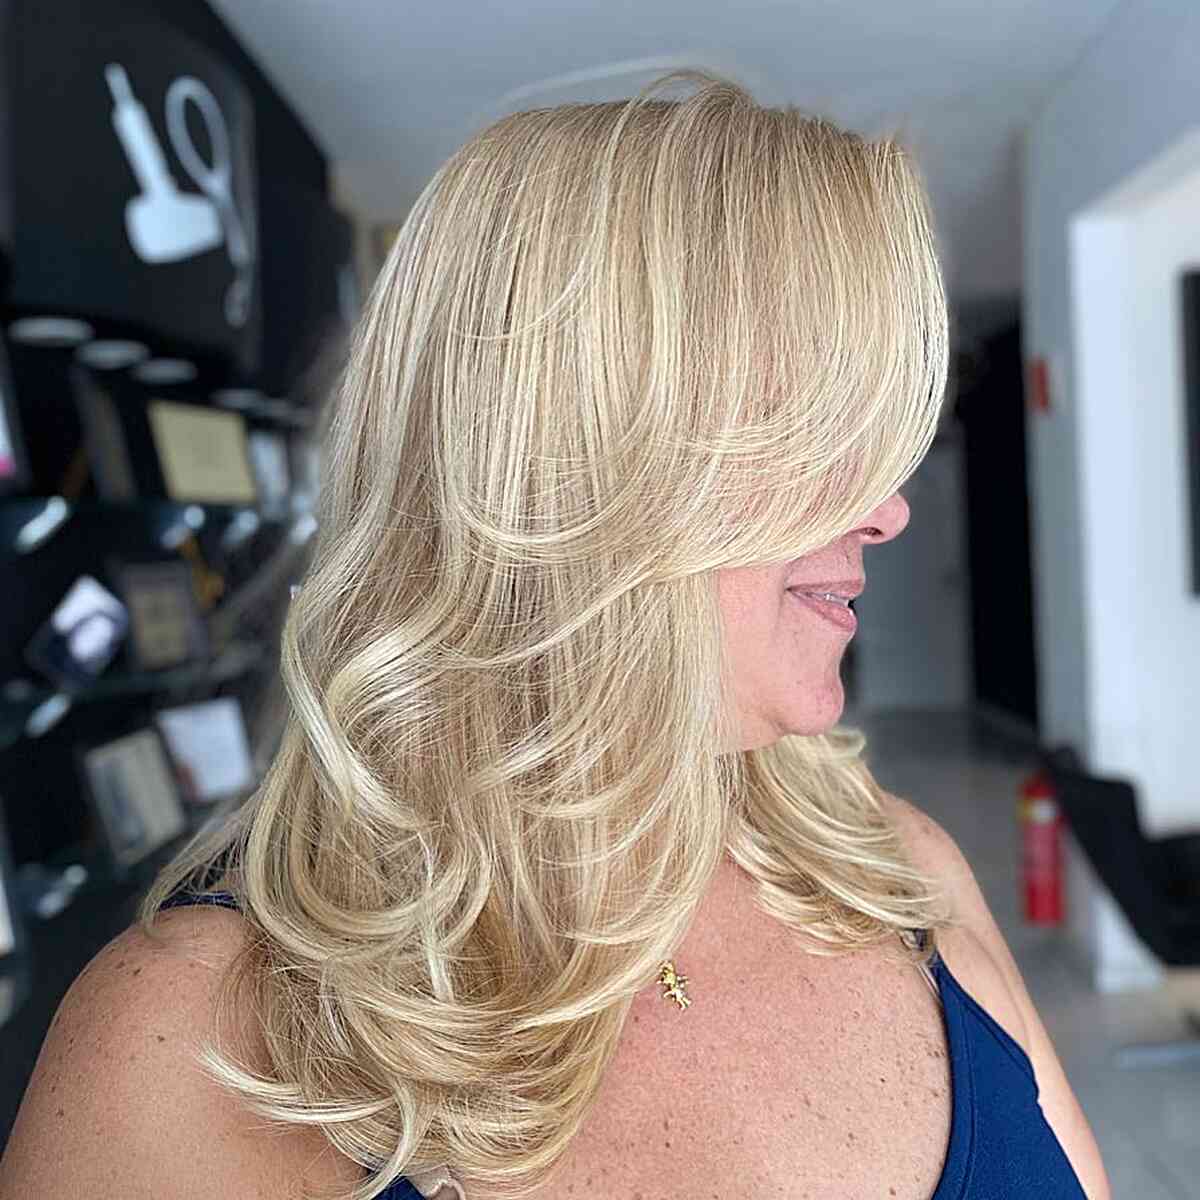 Bright Blonde on Medium Layered Cut for Plus Size Women Aged 50 and Up